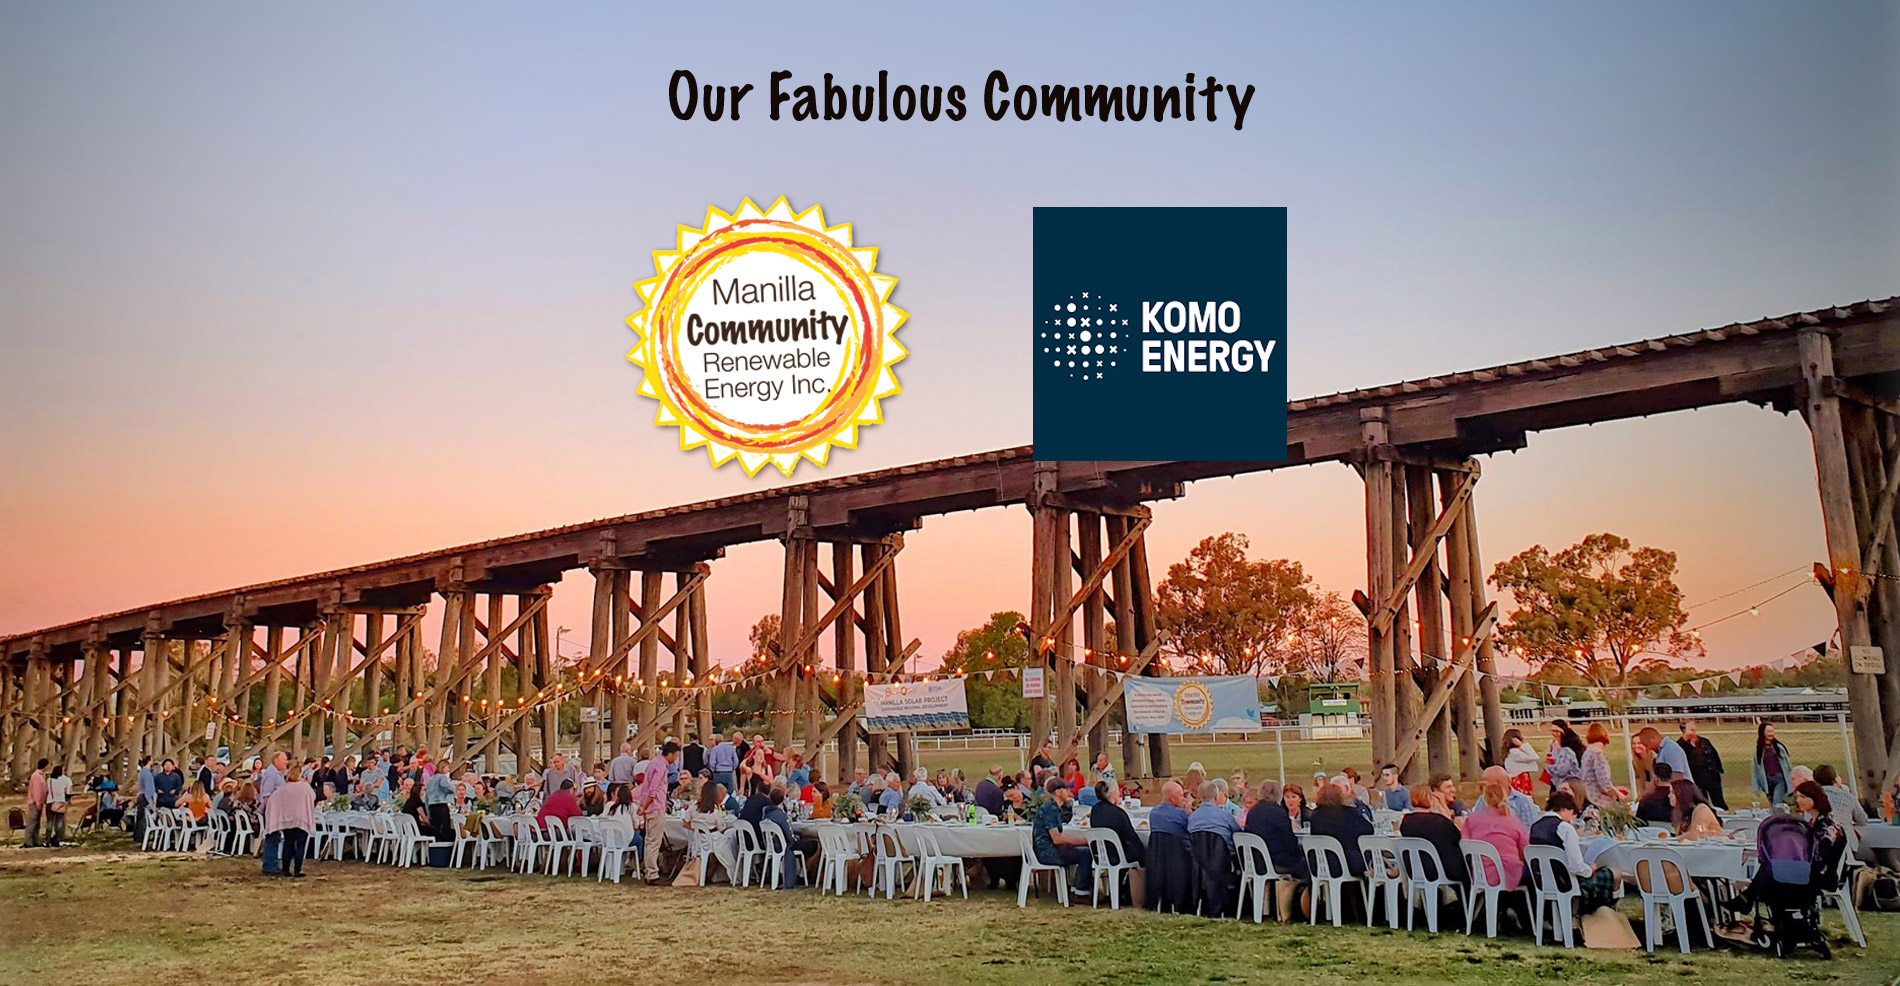 titled our fabulous community, with logos for Manilla Community Renewable Energy Inc. and Komo Energy over a view of people eating at a Long Lunch event beside the Manilla Viaduct